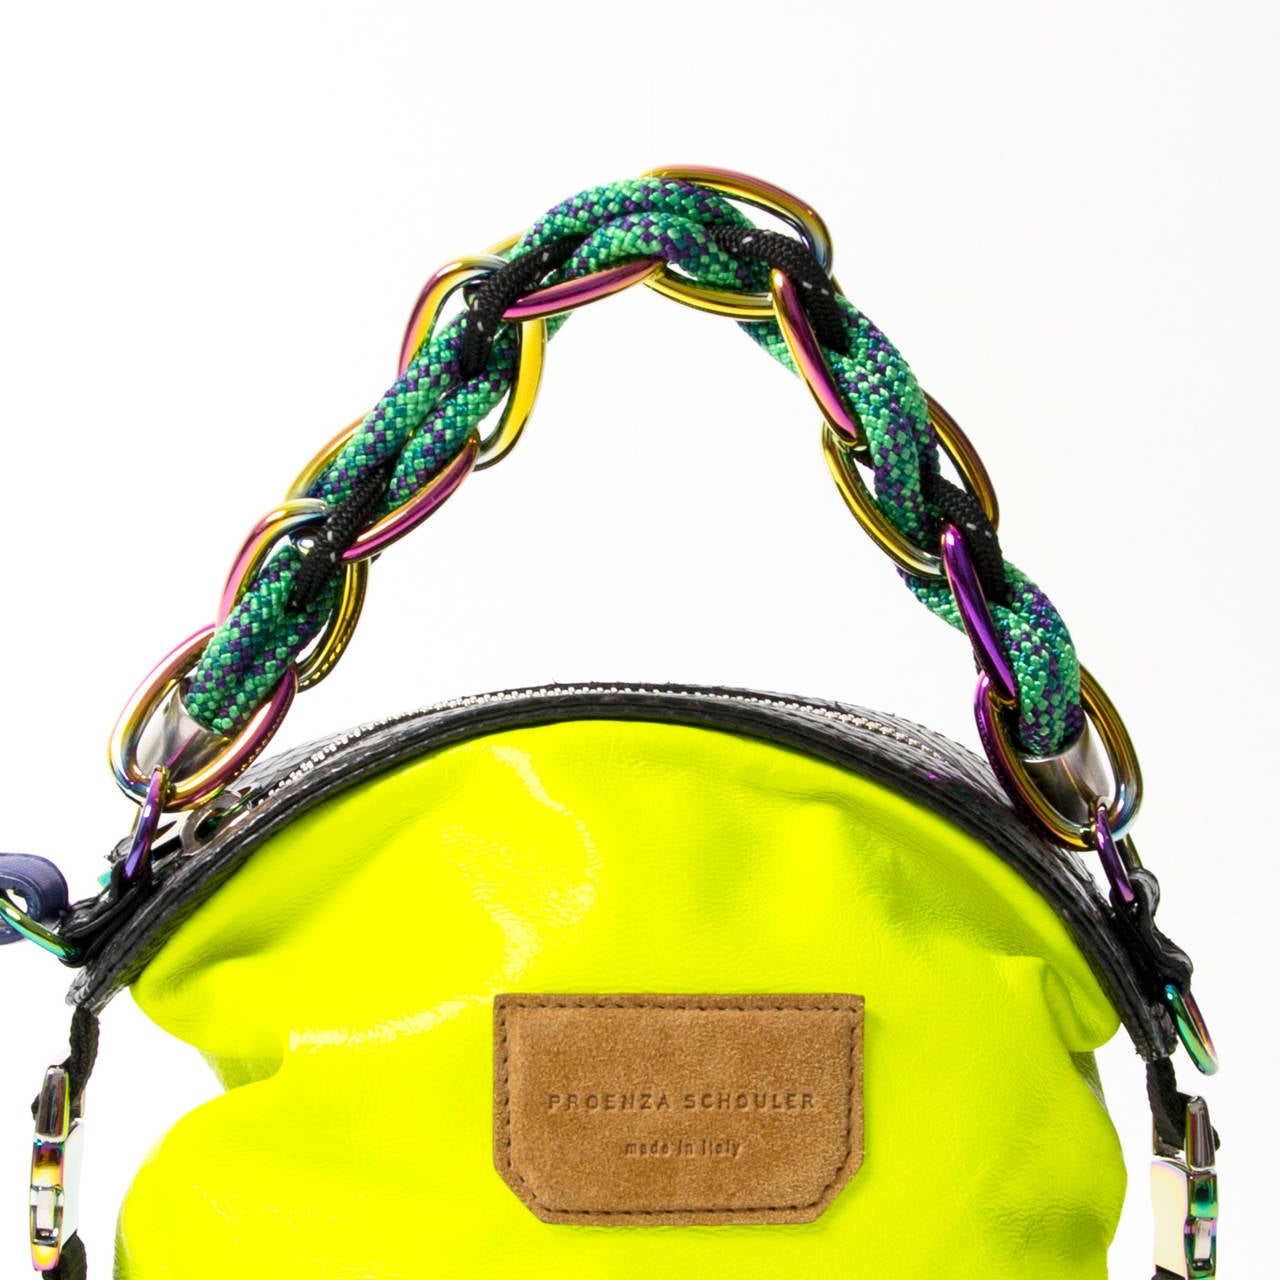 Women's Proenza Schouler Limited Edition Neon Small Bag